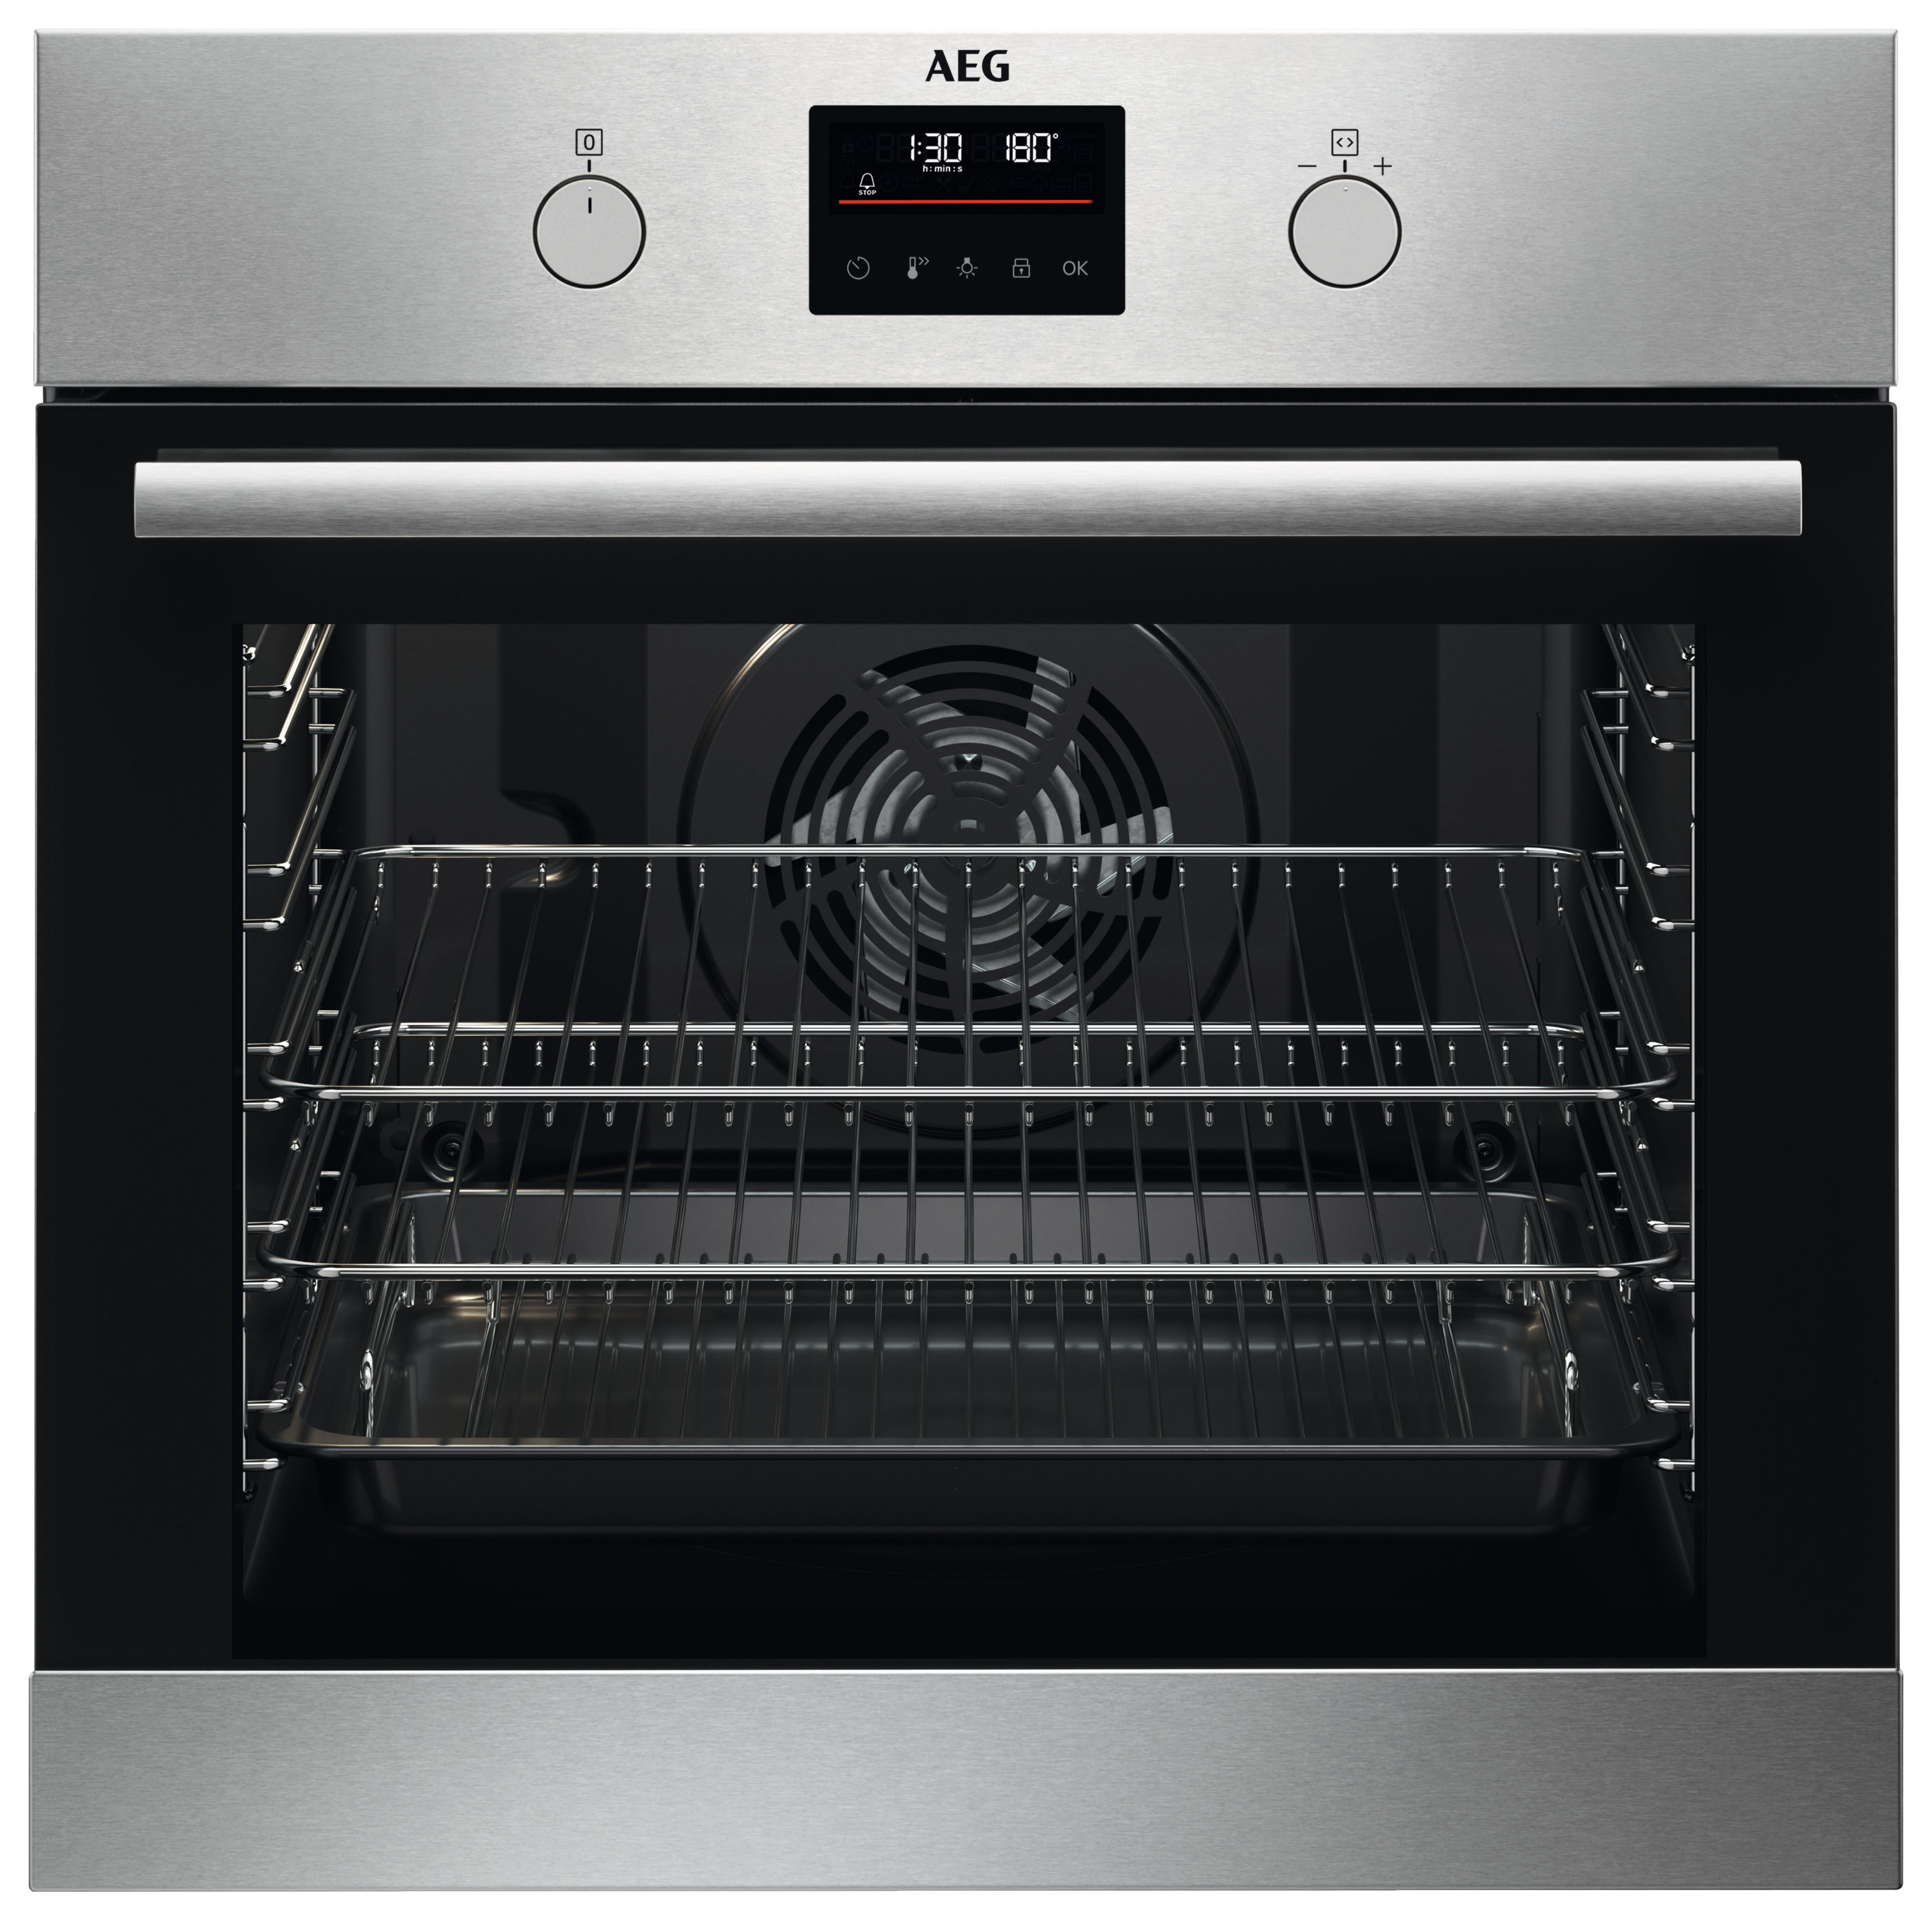 AEG BPK355061M 6000 Series Multifunction Oven with Pyrolytic Cleaning - Stainless Steel